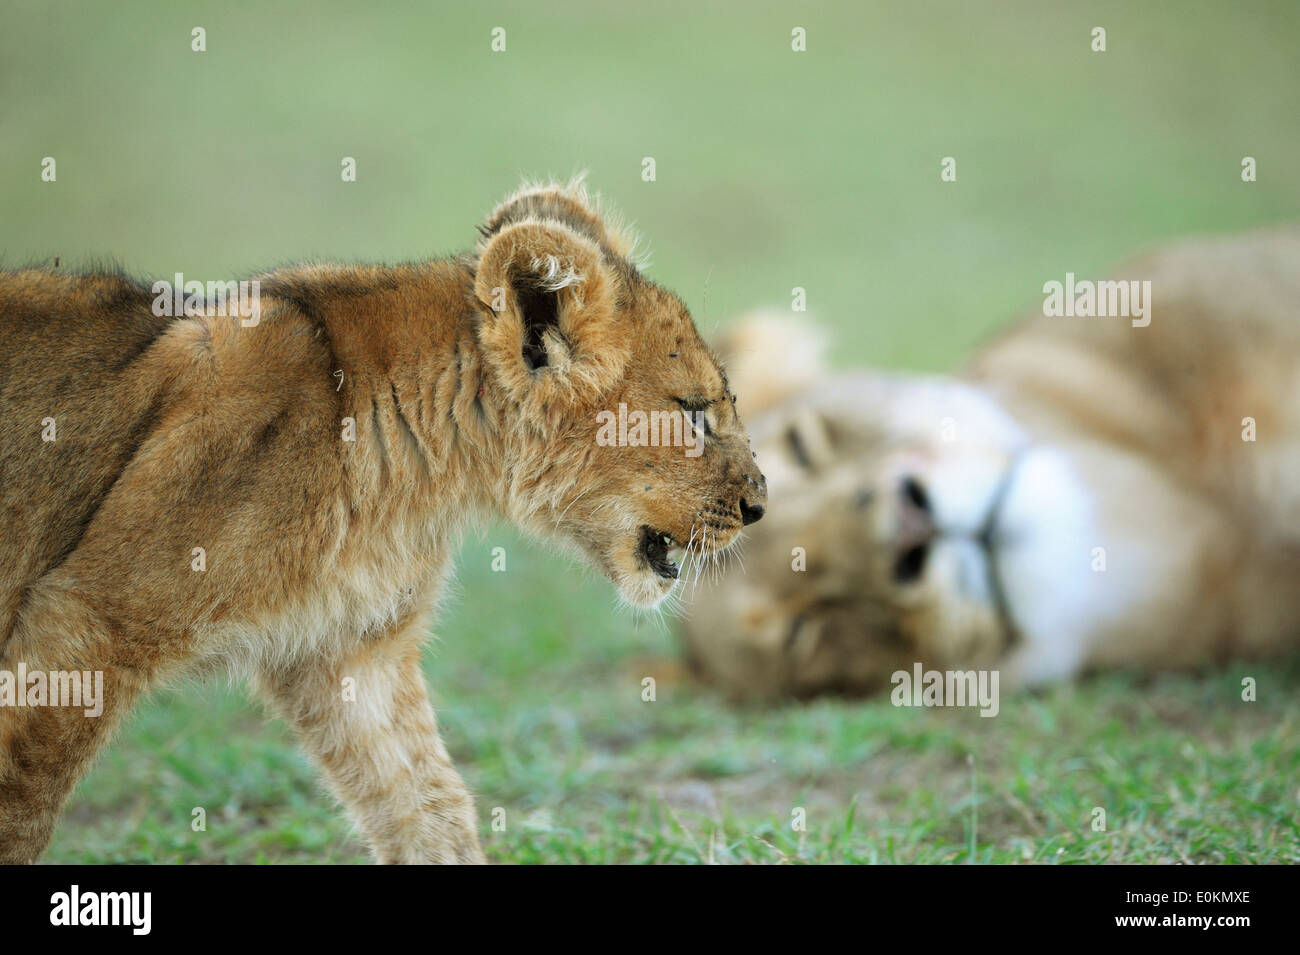 Lion cub in front of it's mother, Masai Mara, Kenya Stock Photo